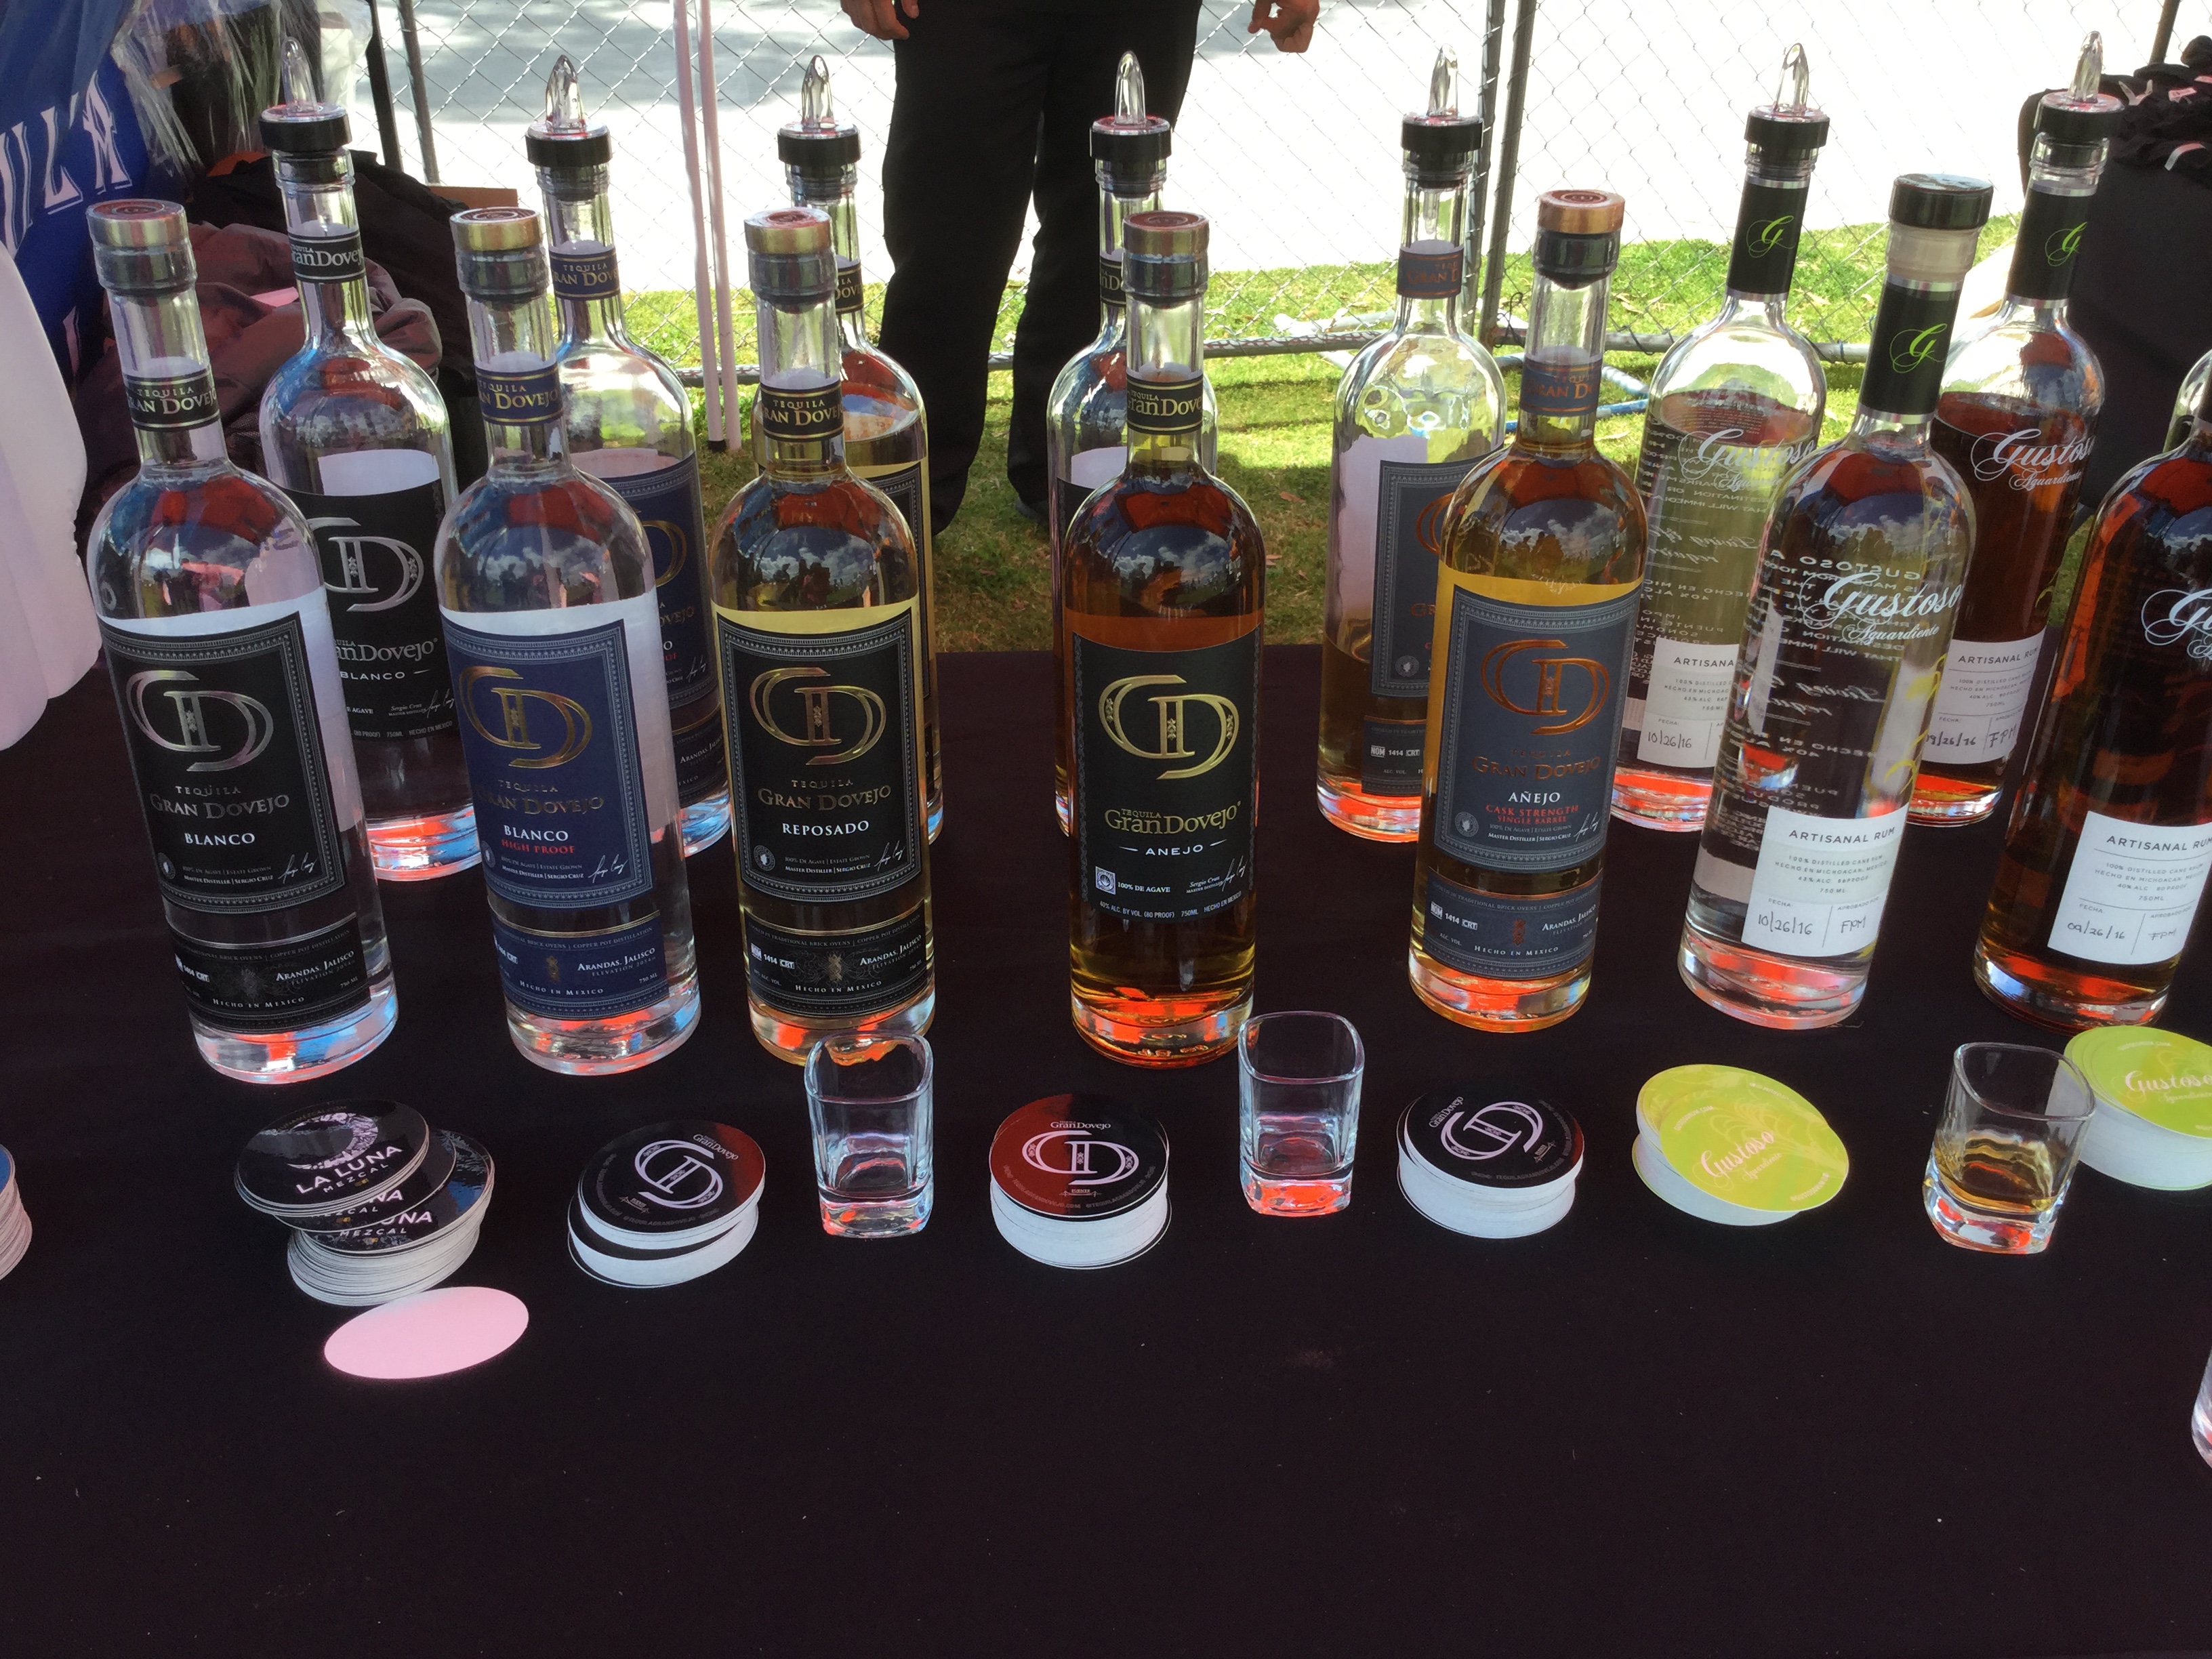 Tequila and taco festival (San Diego) TequilaConnection Updates